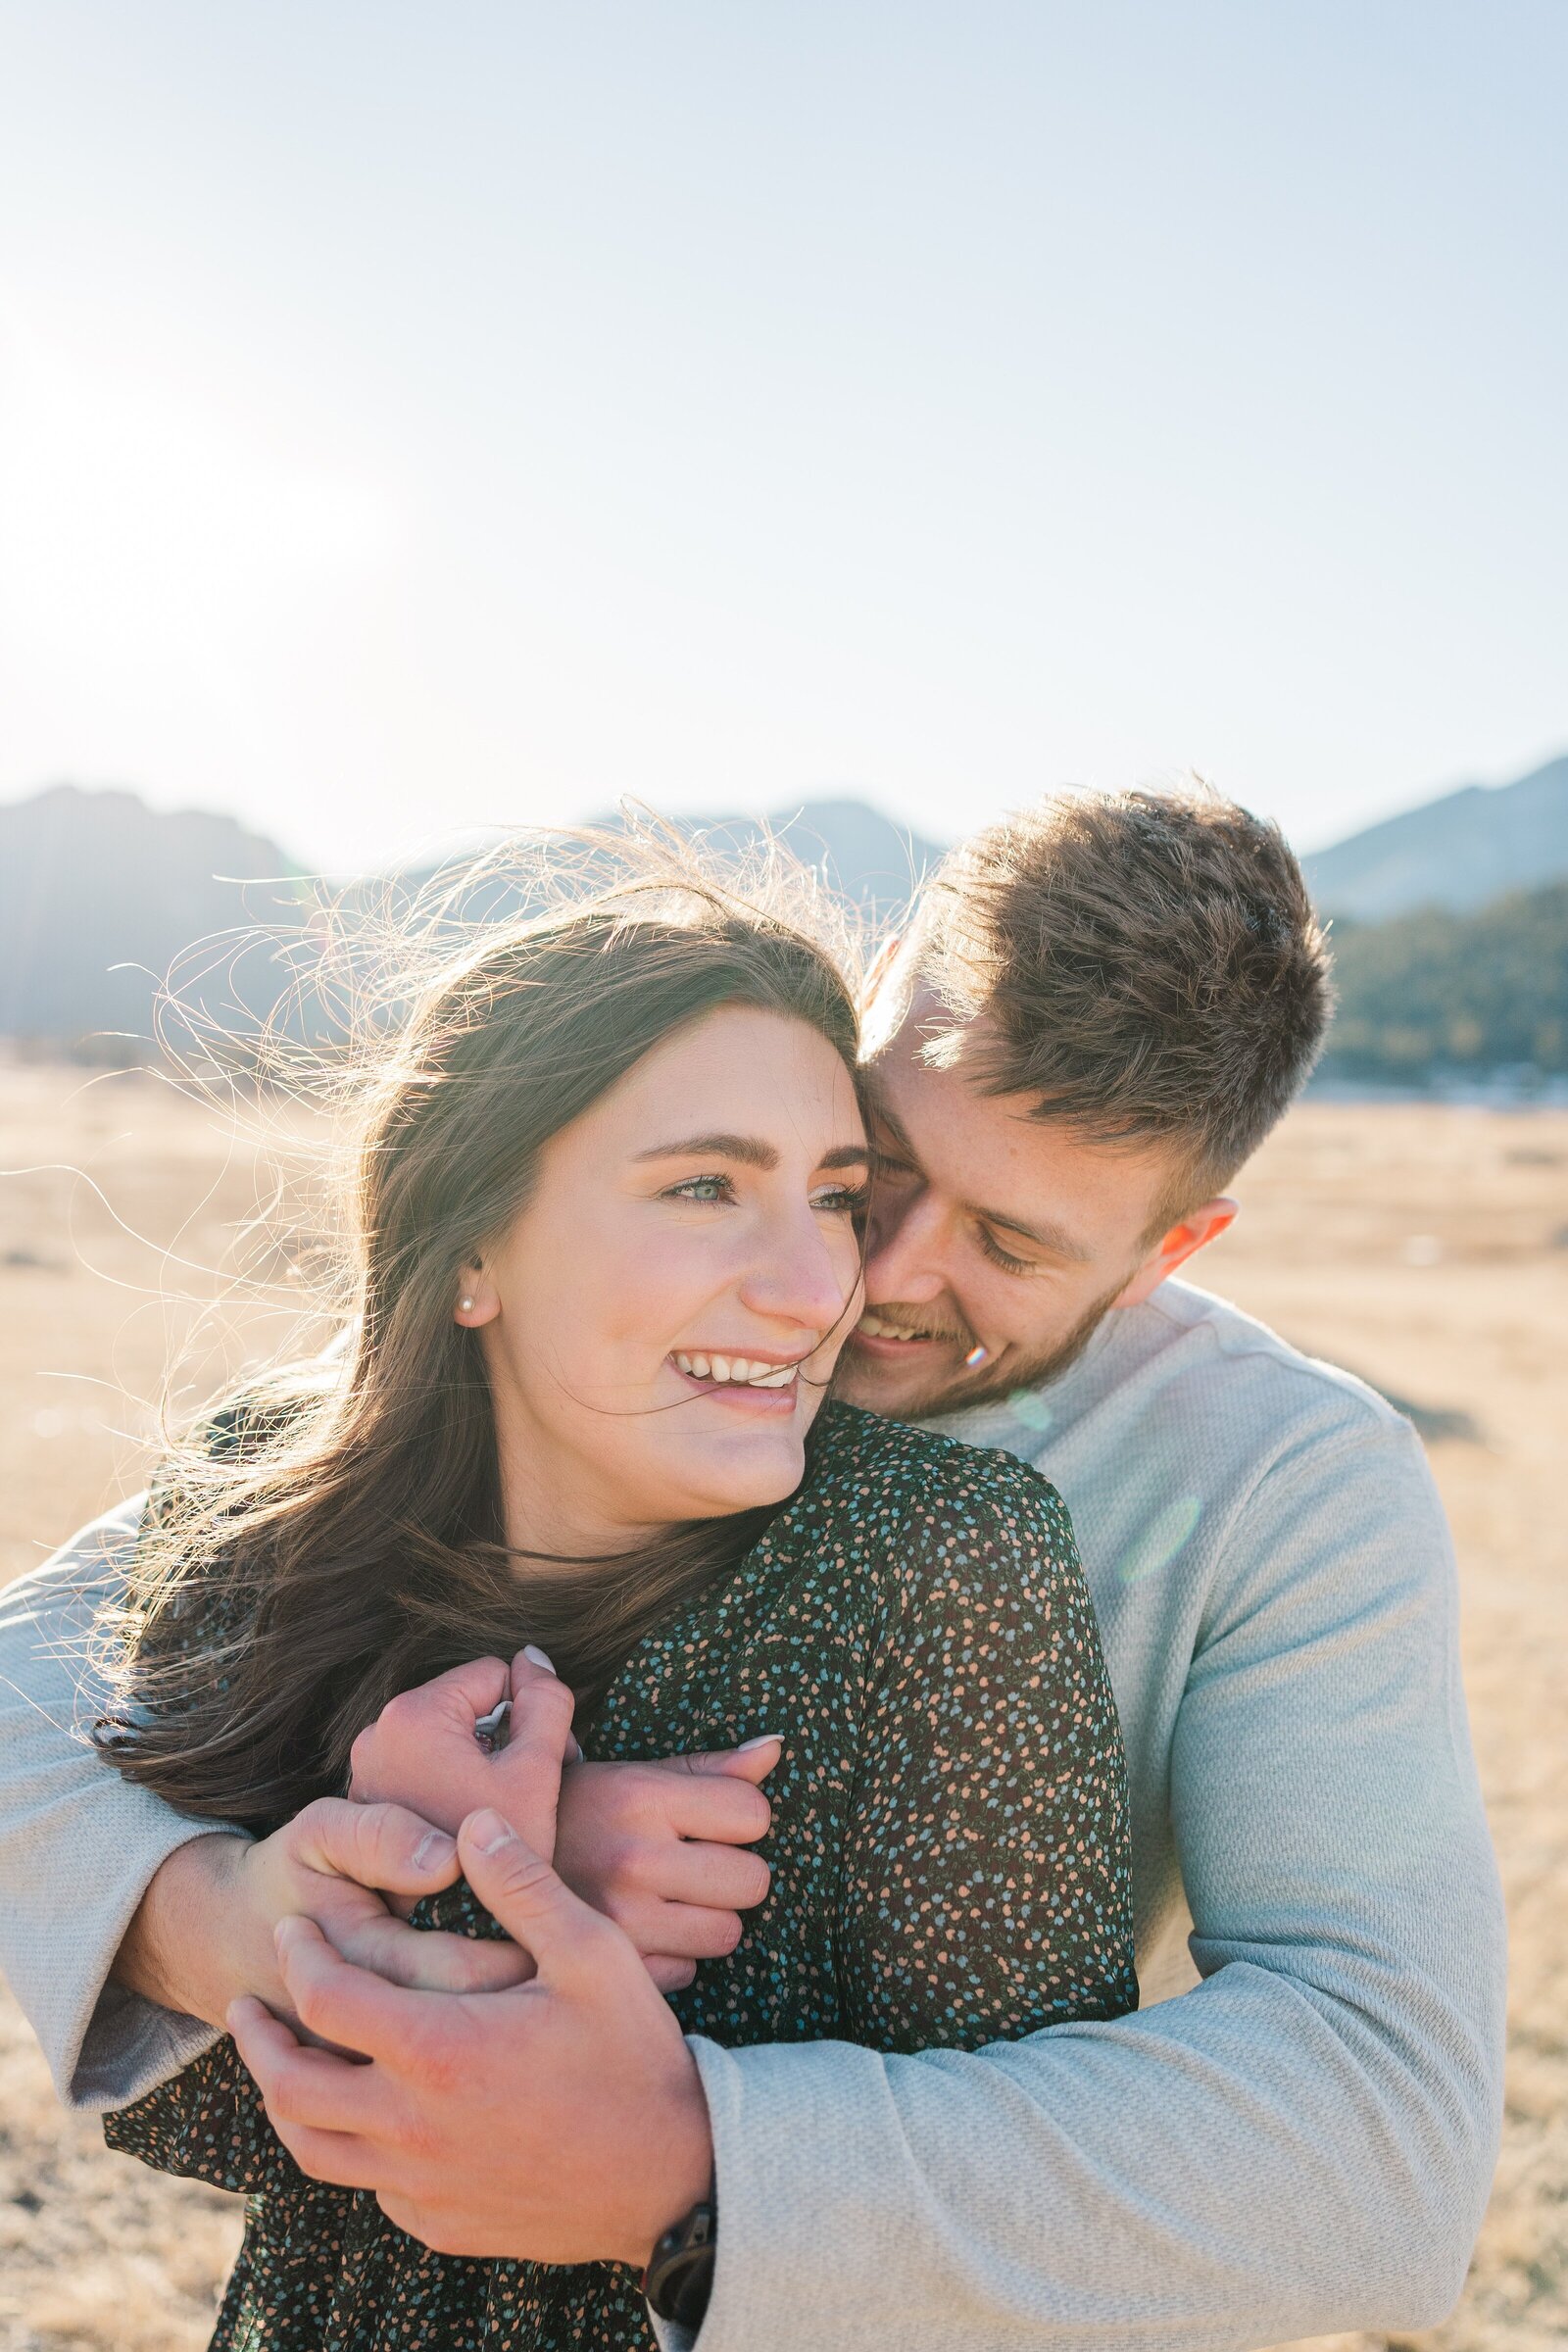 Every love story is unique, and Samantha Immer's storytelling approach to photography captures the emotion, meaning, and beauty of your journey.